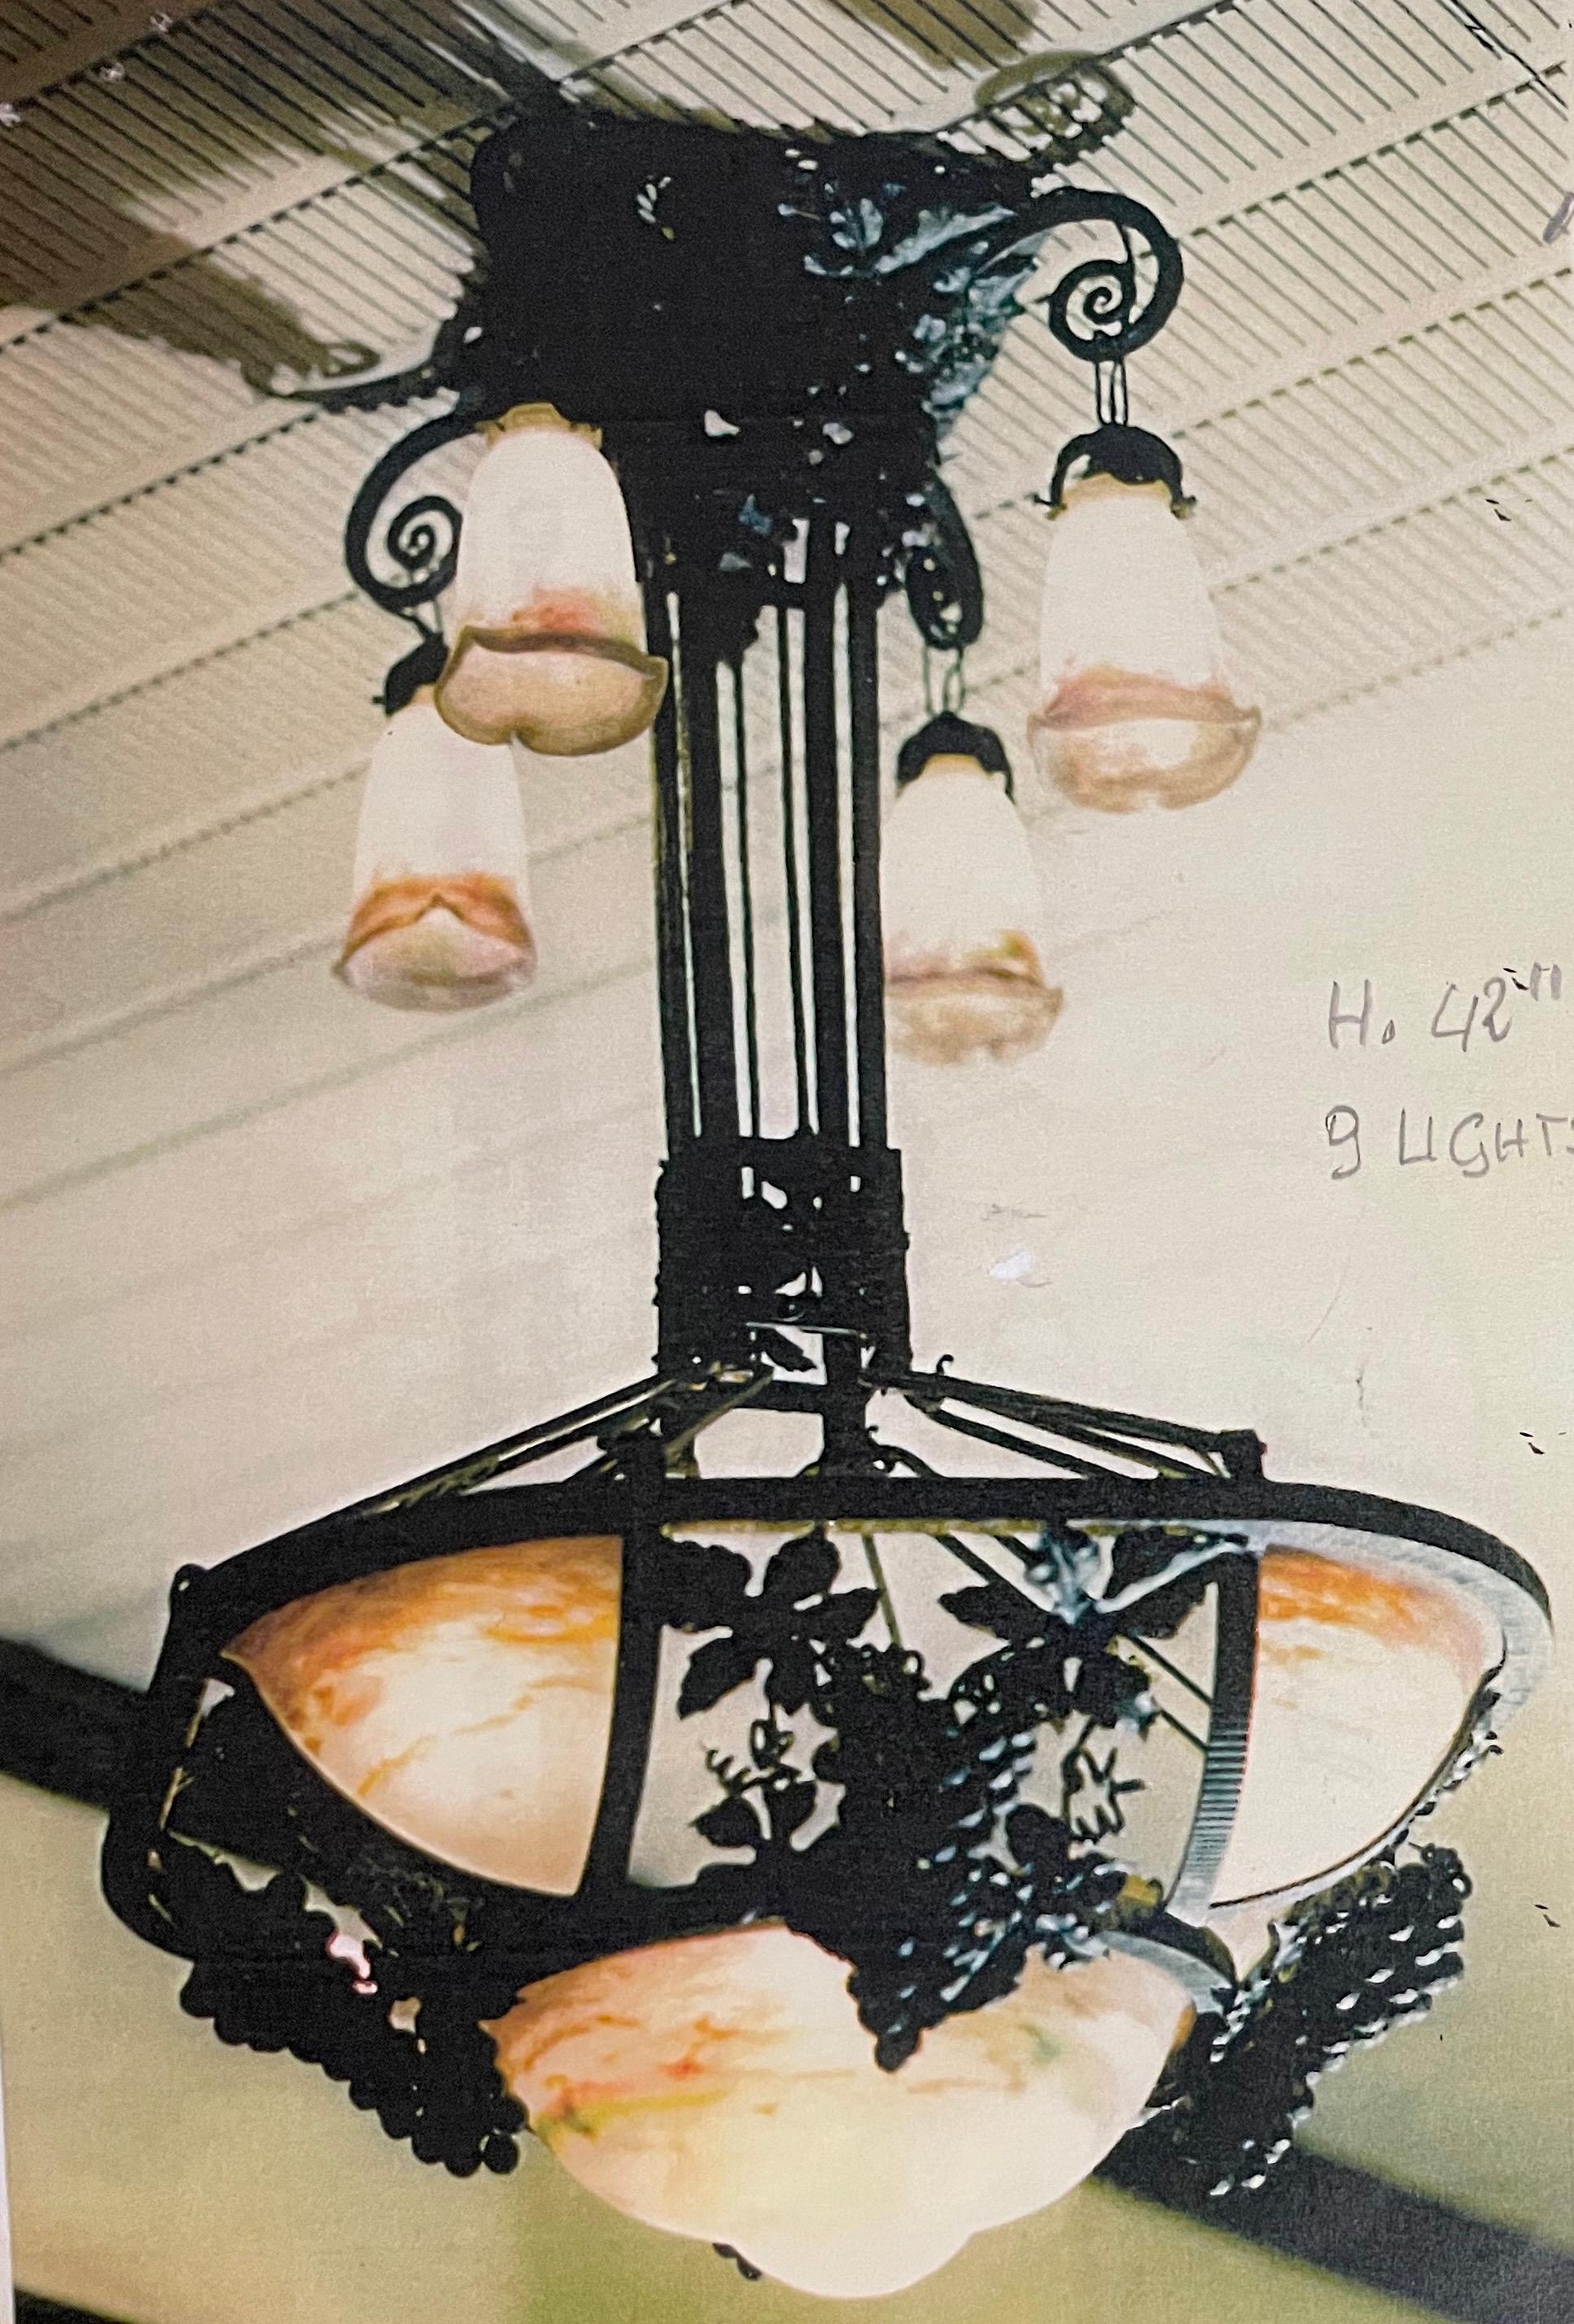 Antique handmade lamp with botanical motifs by Muller Frères.

Muller Frères were renowned glassmakers from Lunéville, France, famous for producing art nouveau glassworks.

This is a rare and beautiful handmade lamp, created in early 20th century.